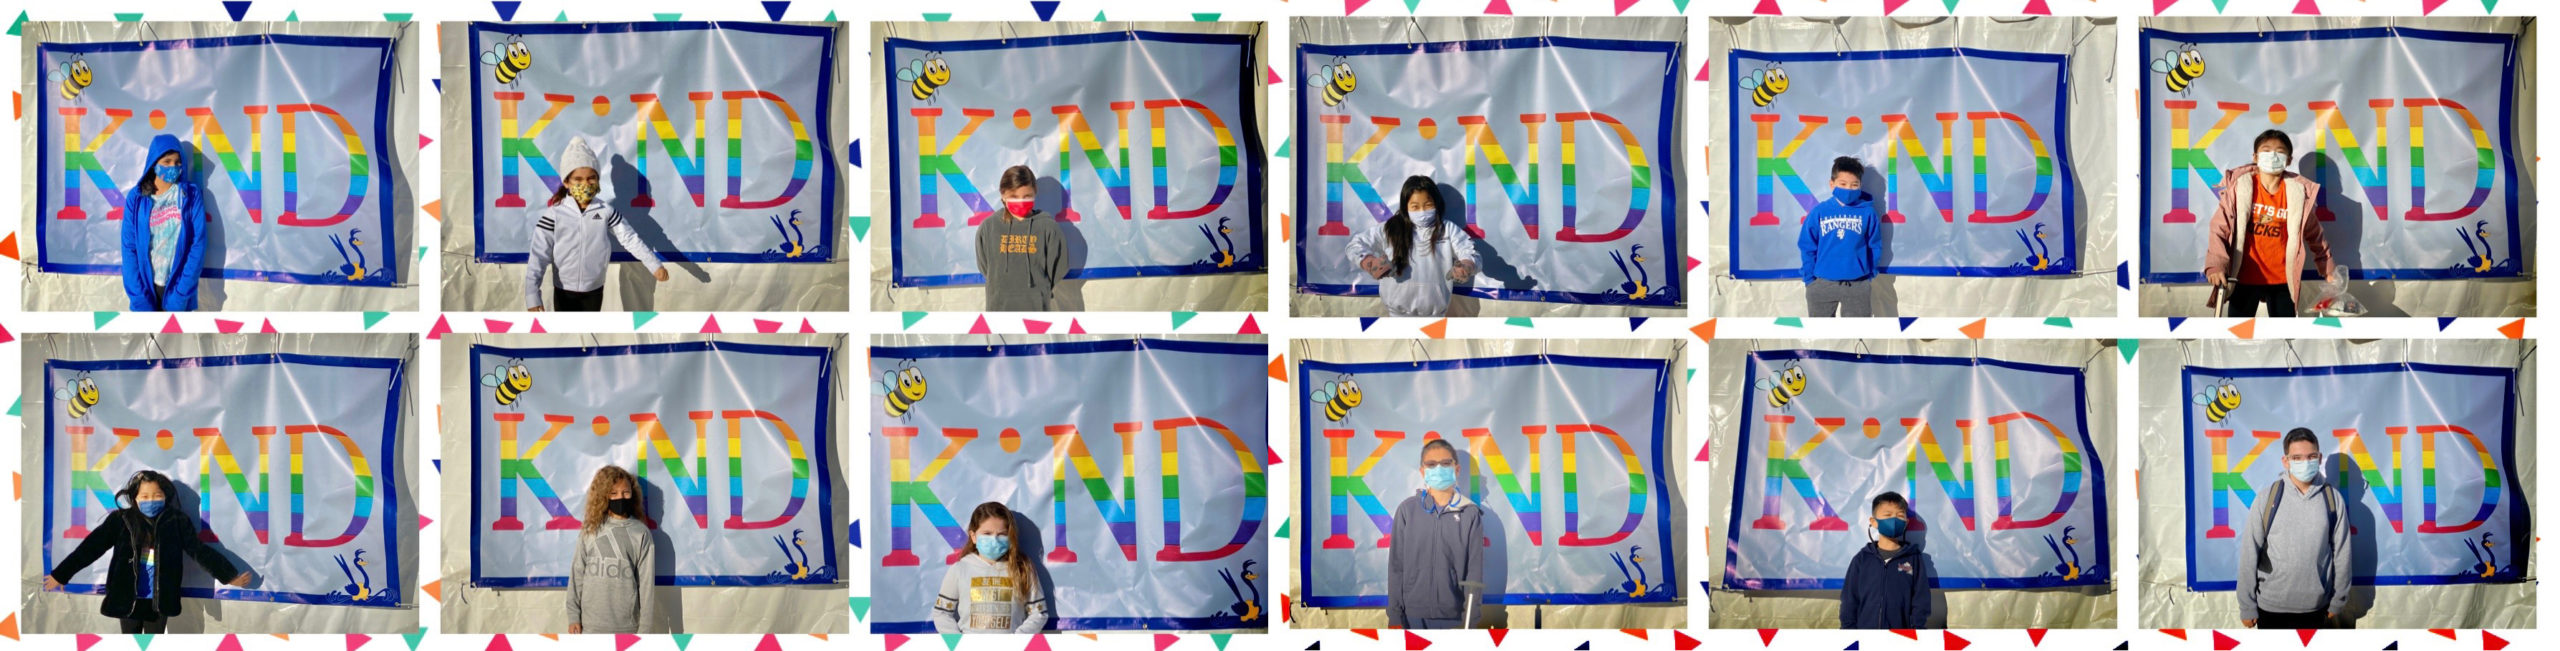 kids in front of kindness banner